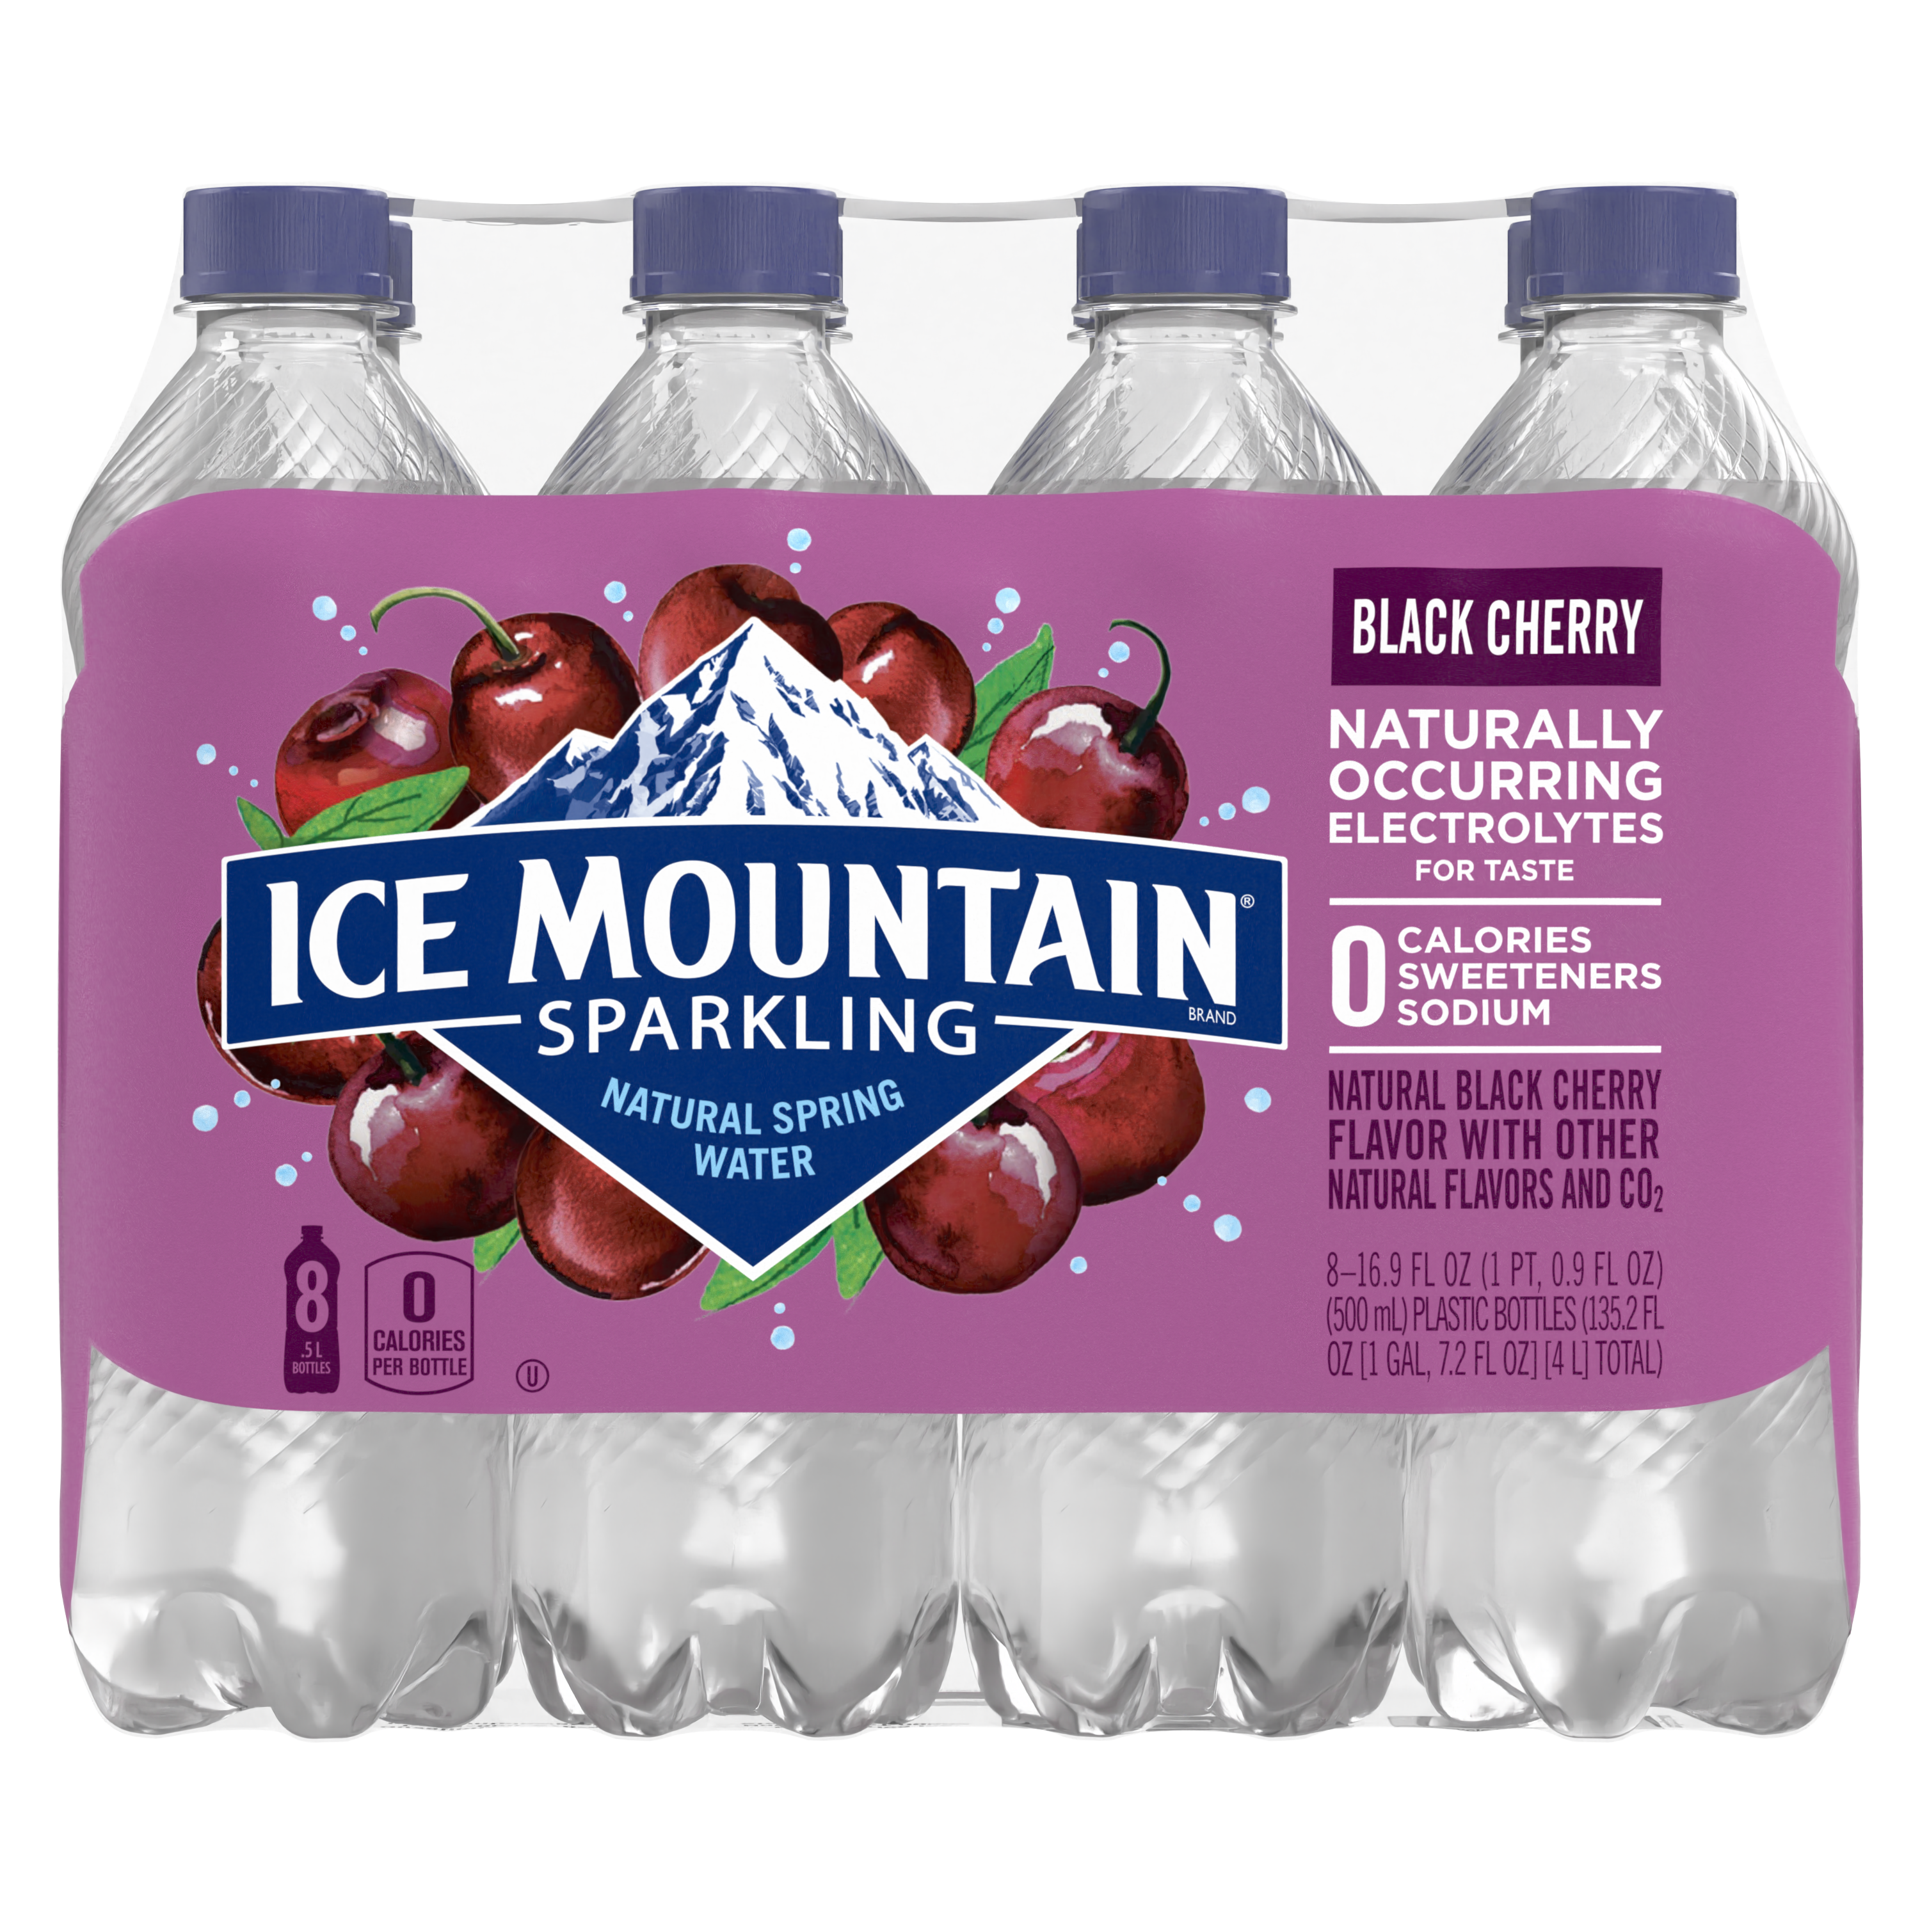 slide 1 of 5, Ice Mountain Brand Sparkling Natural Spring Water, Black Cherry, 16.9 oz